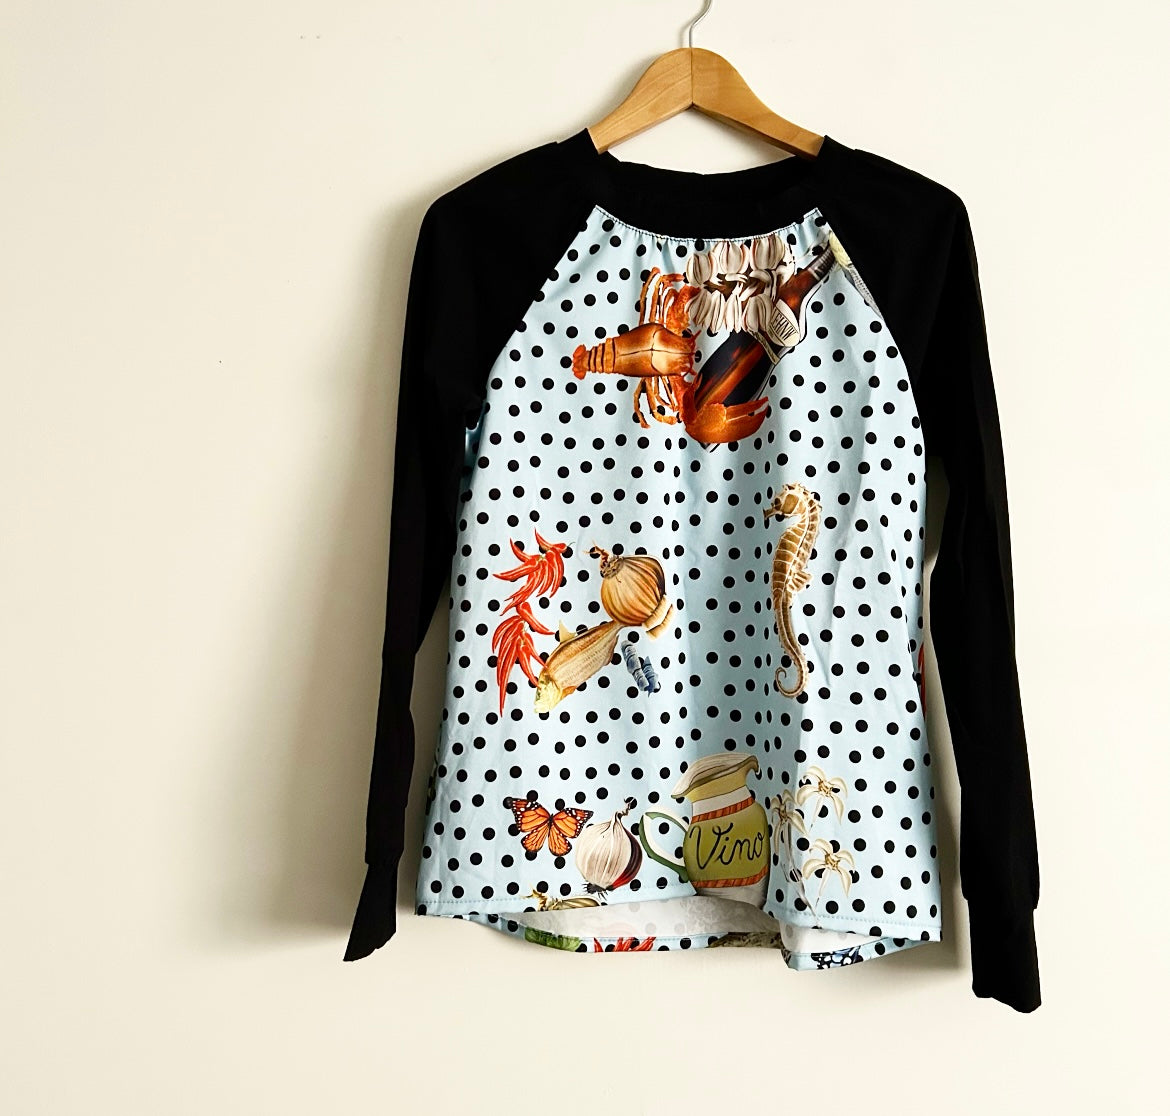 Sample Long sleeve top - Spotty Blue with Black (S)